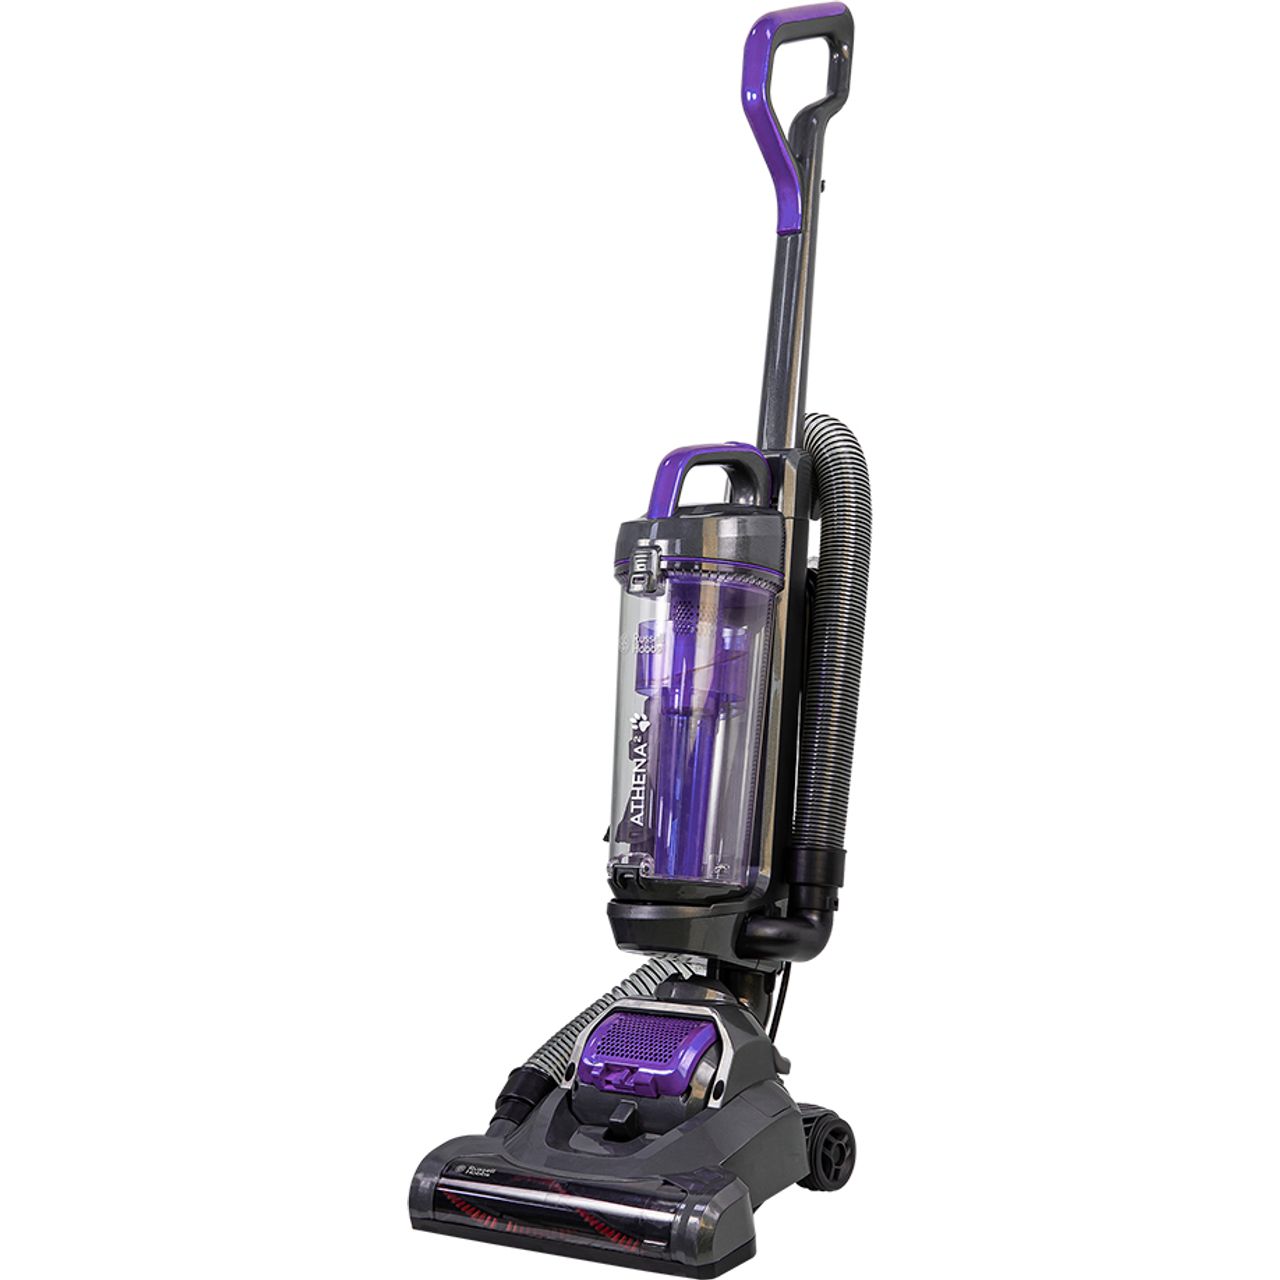 Russell Hobbs Athena 2 RHUV5601 Upright Vacuum Cleaner Review